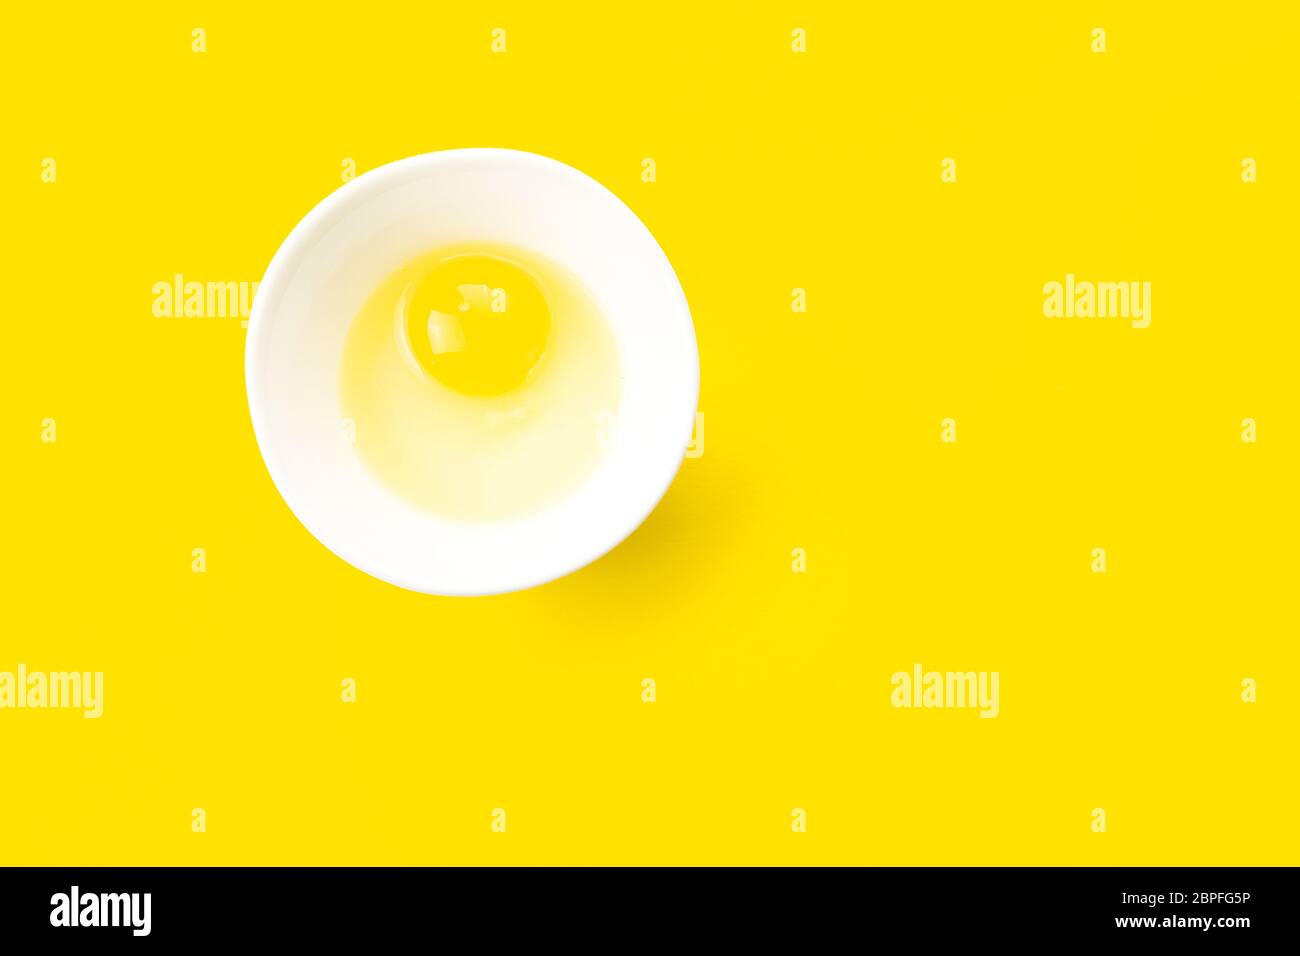 Raw egg in bowl on yellow background. Healthy food and cooking at home concept. Stock Photo